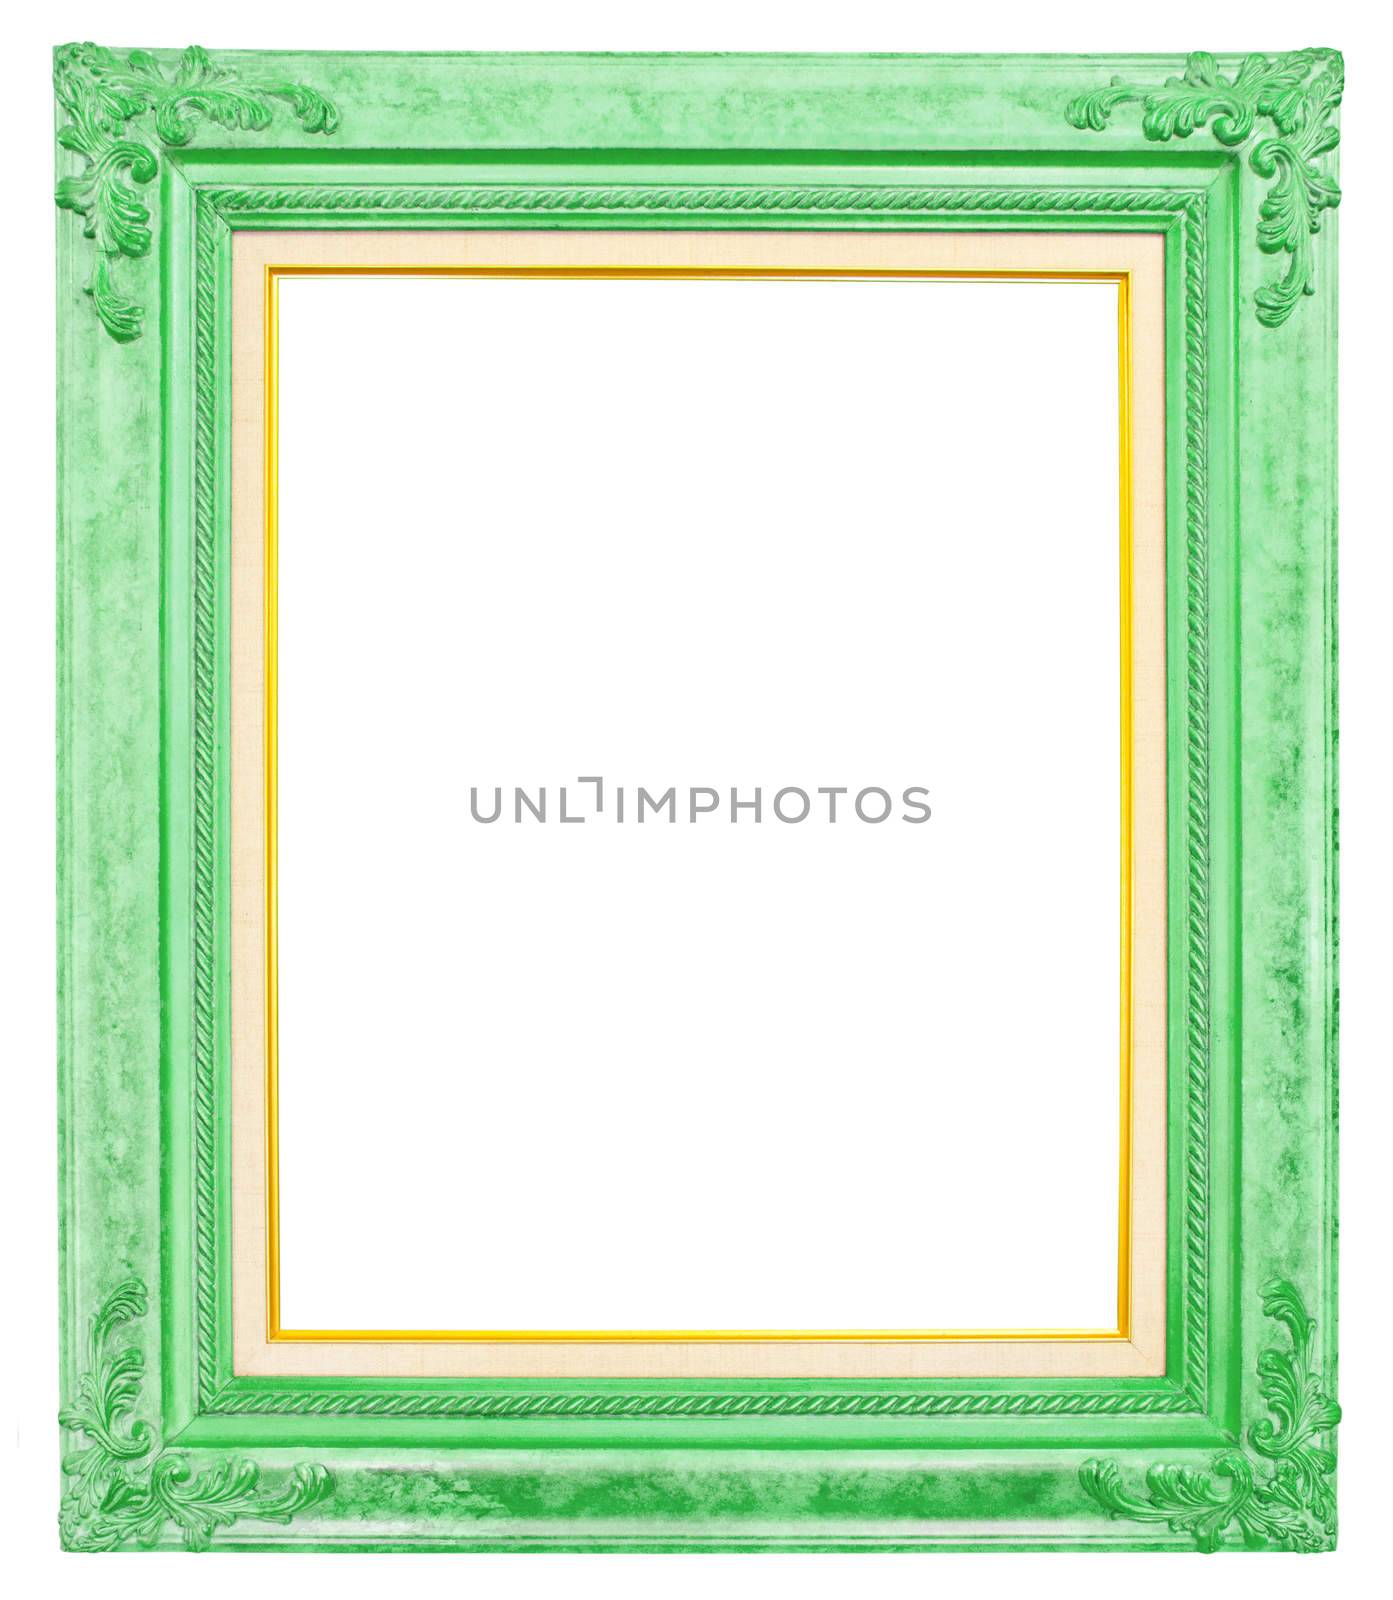 antique frame isolated on white background by Gamjai